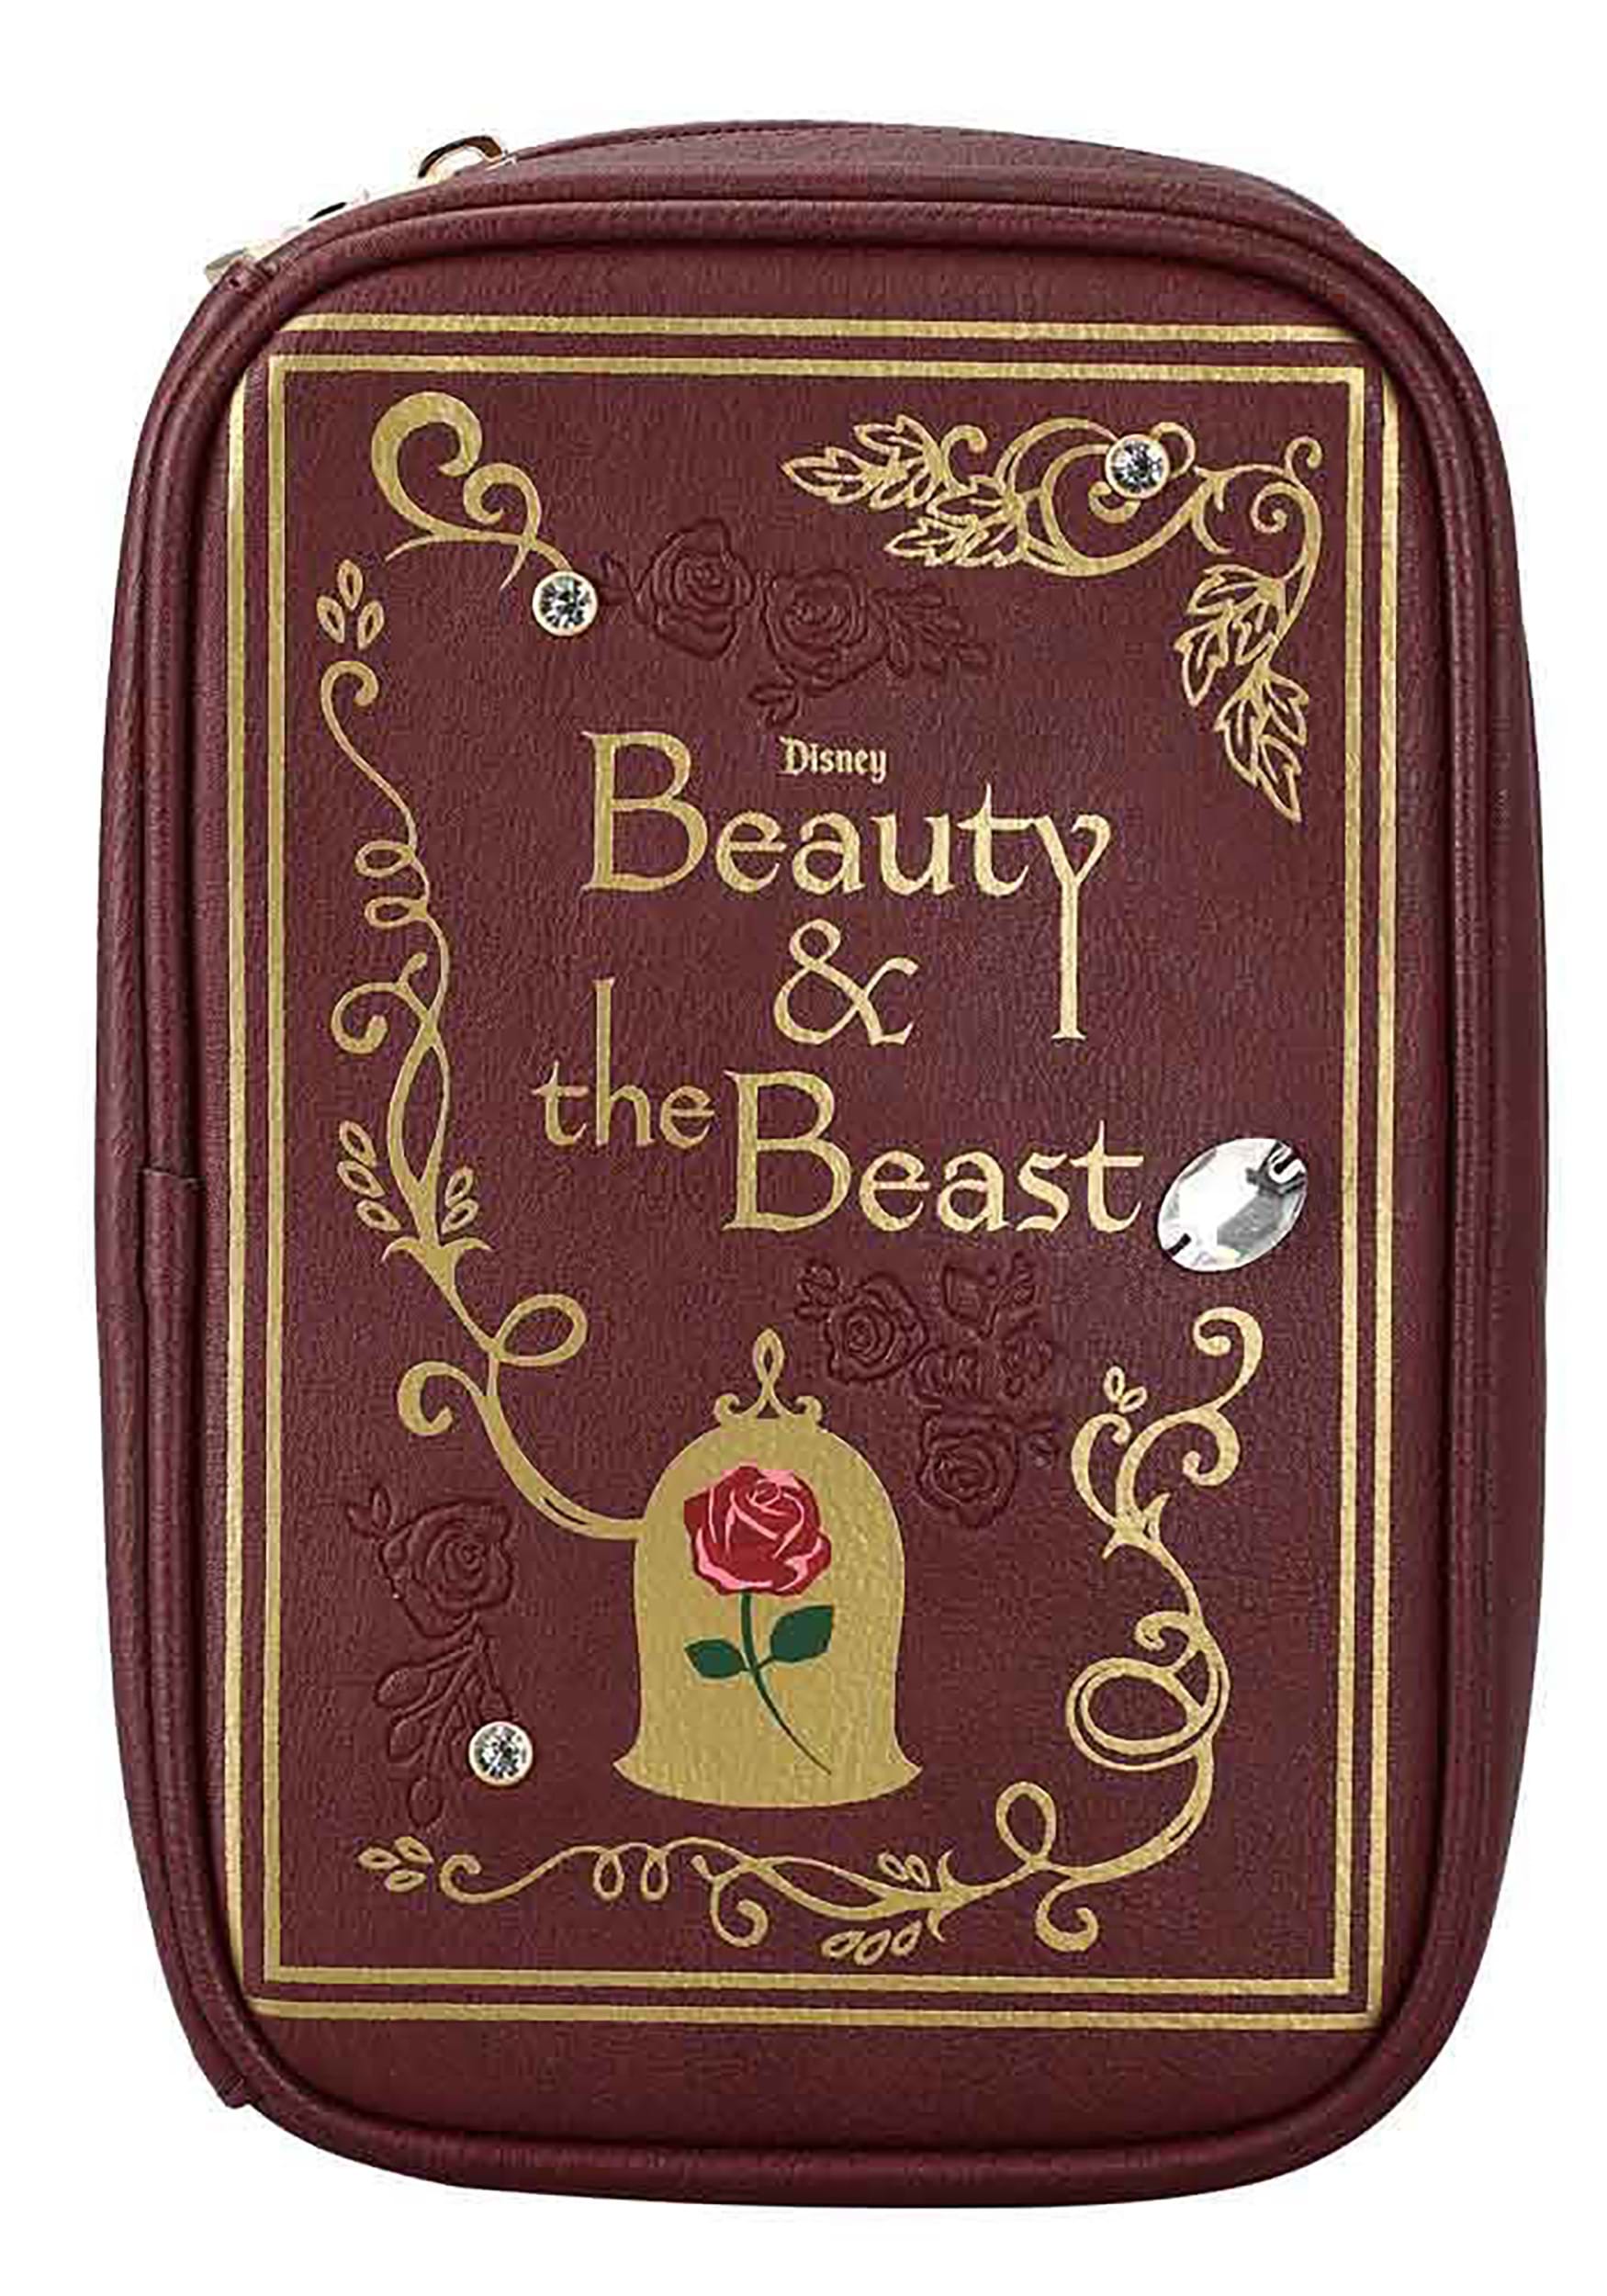 Disney Beauty and the Beast Storybook Inspired Travel Cosmetic Bag